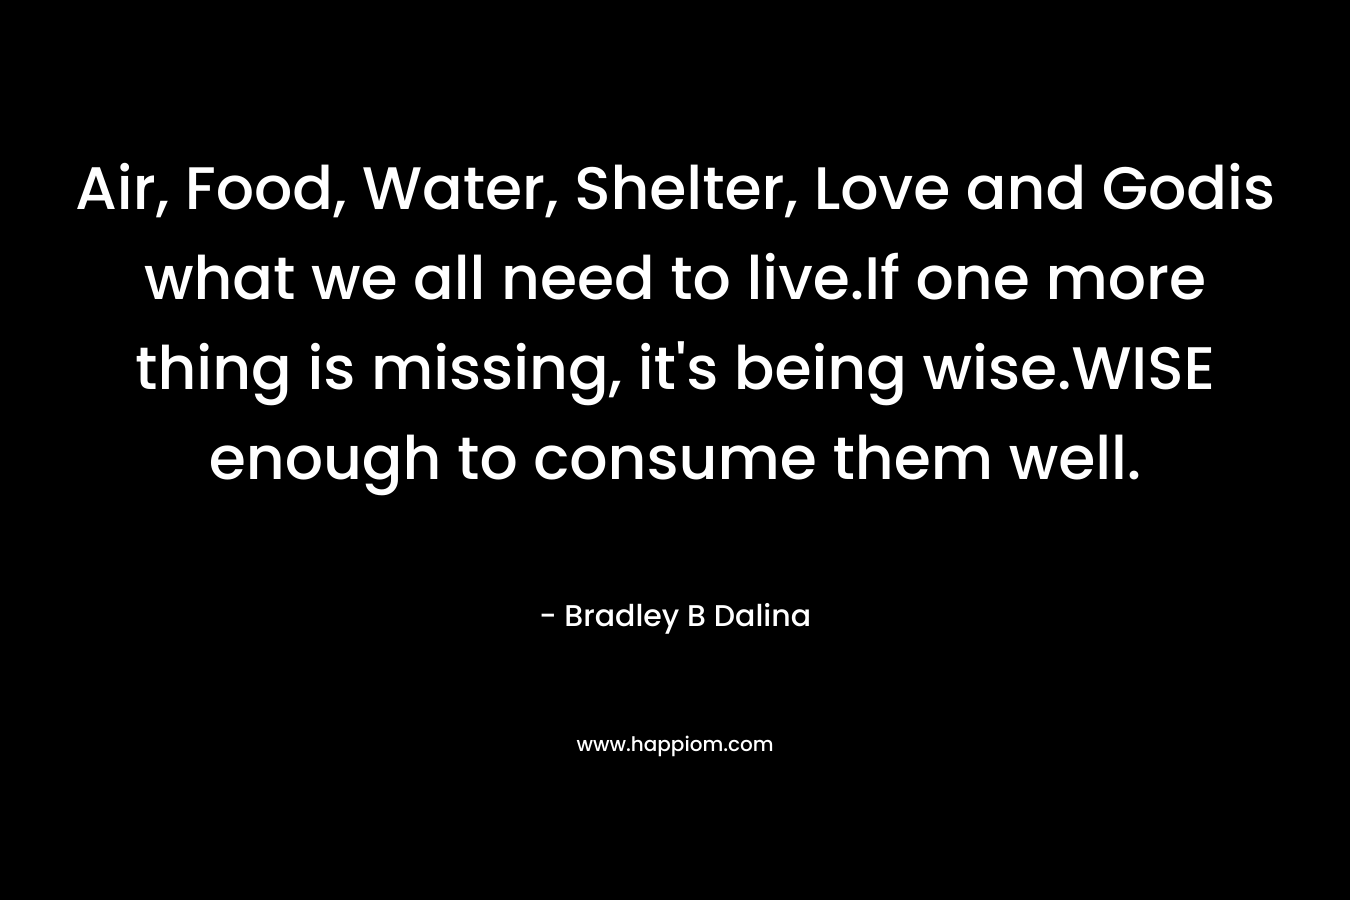 Air, Food, Water, Shelter, Love and Godis what we all need to live.If one more thing is missing, it's being wise.WISE enough to consume them well.